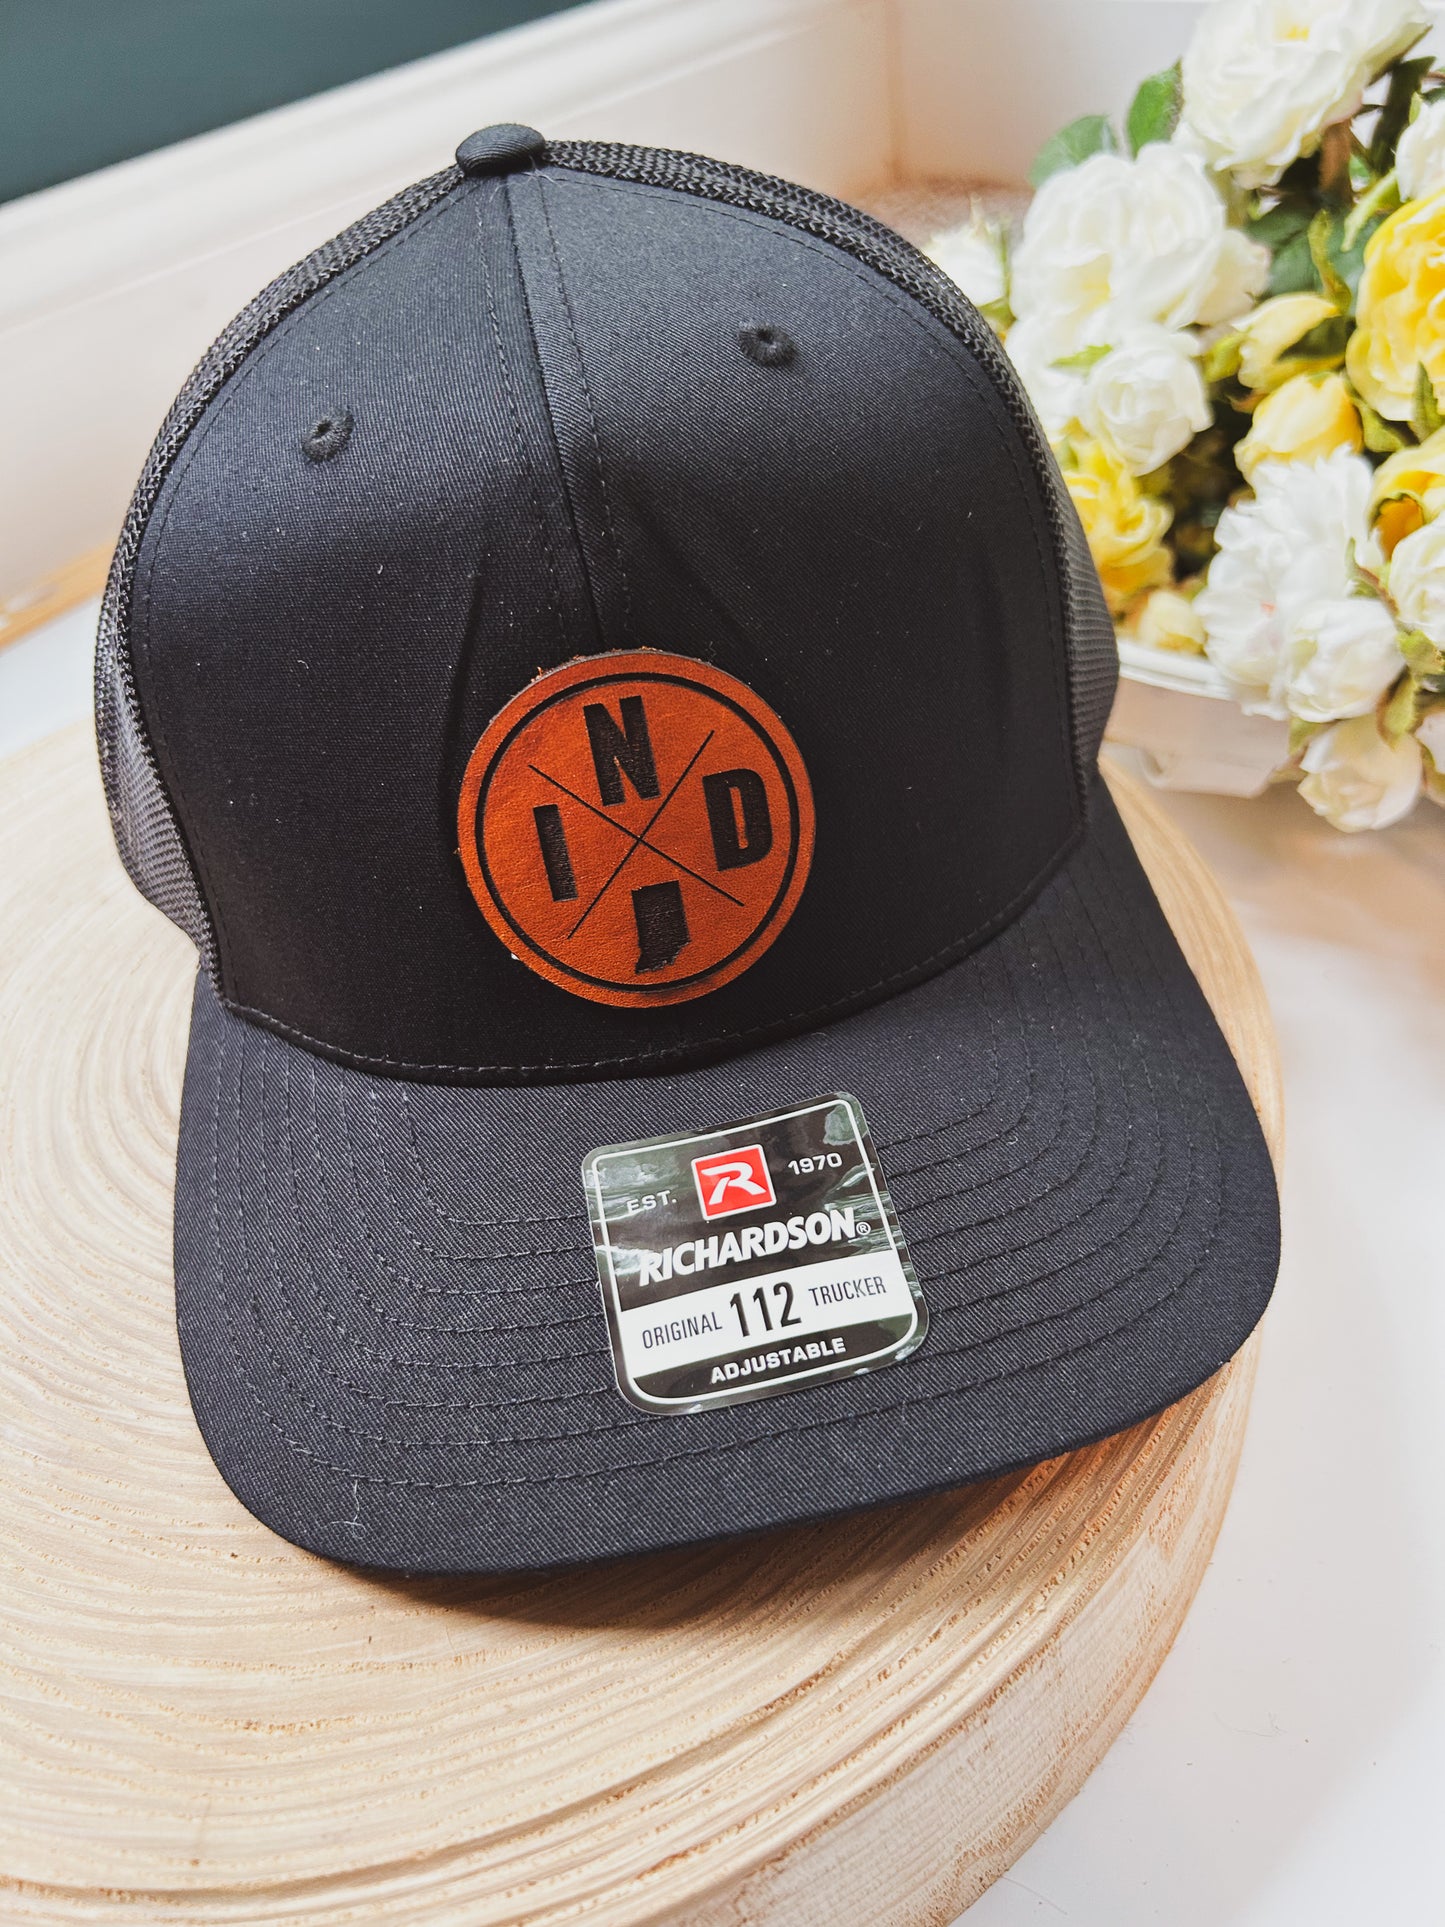 Circle IND Leather Patch on Black Richardson 112 Hat - Snap Closure